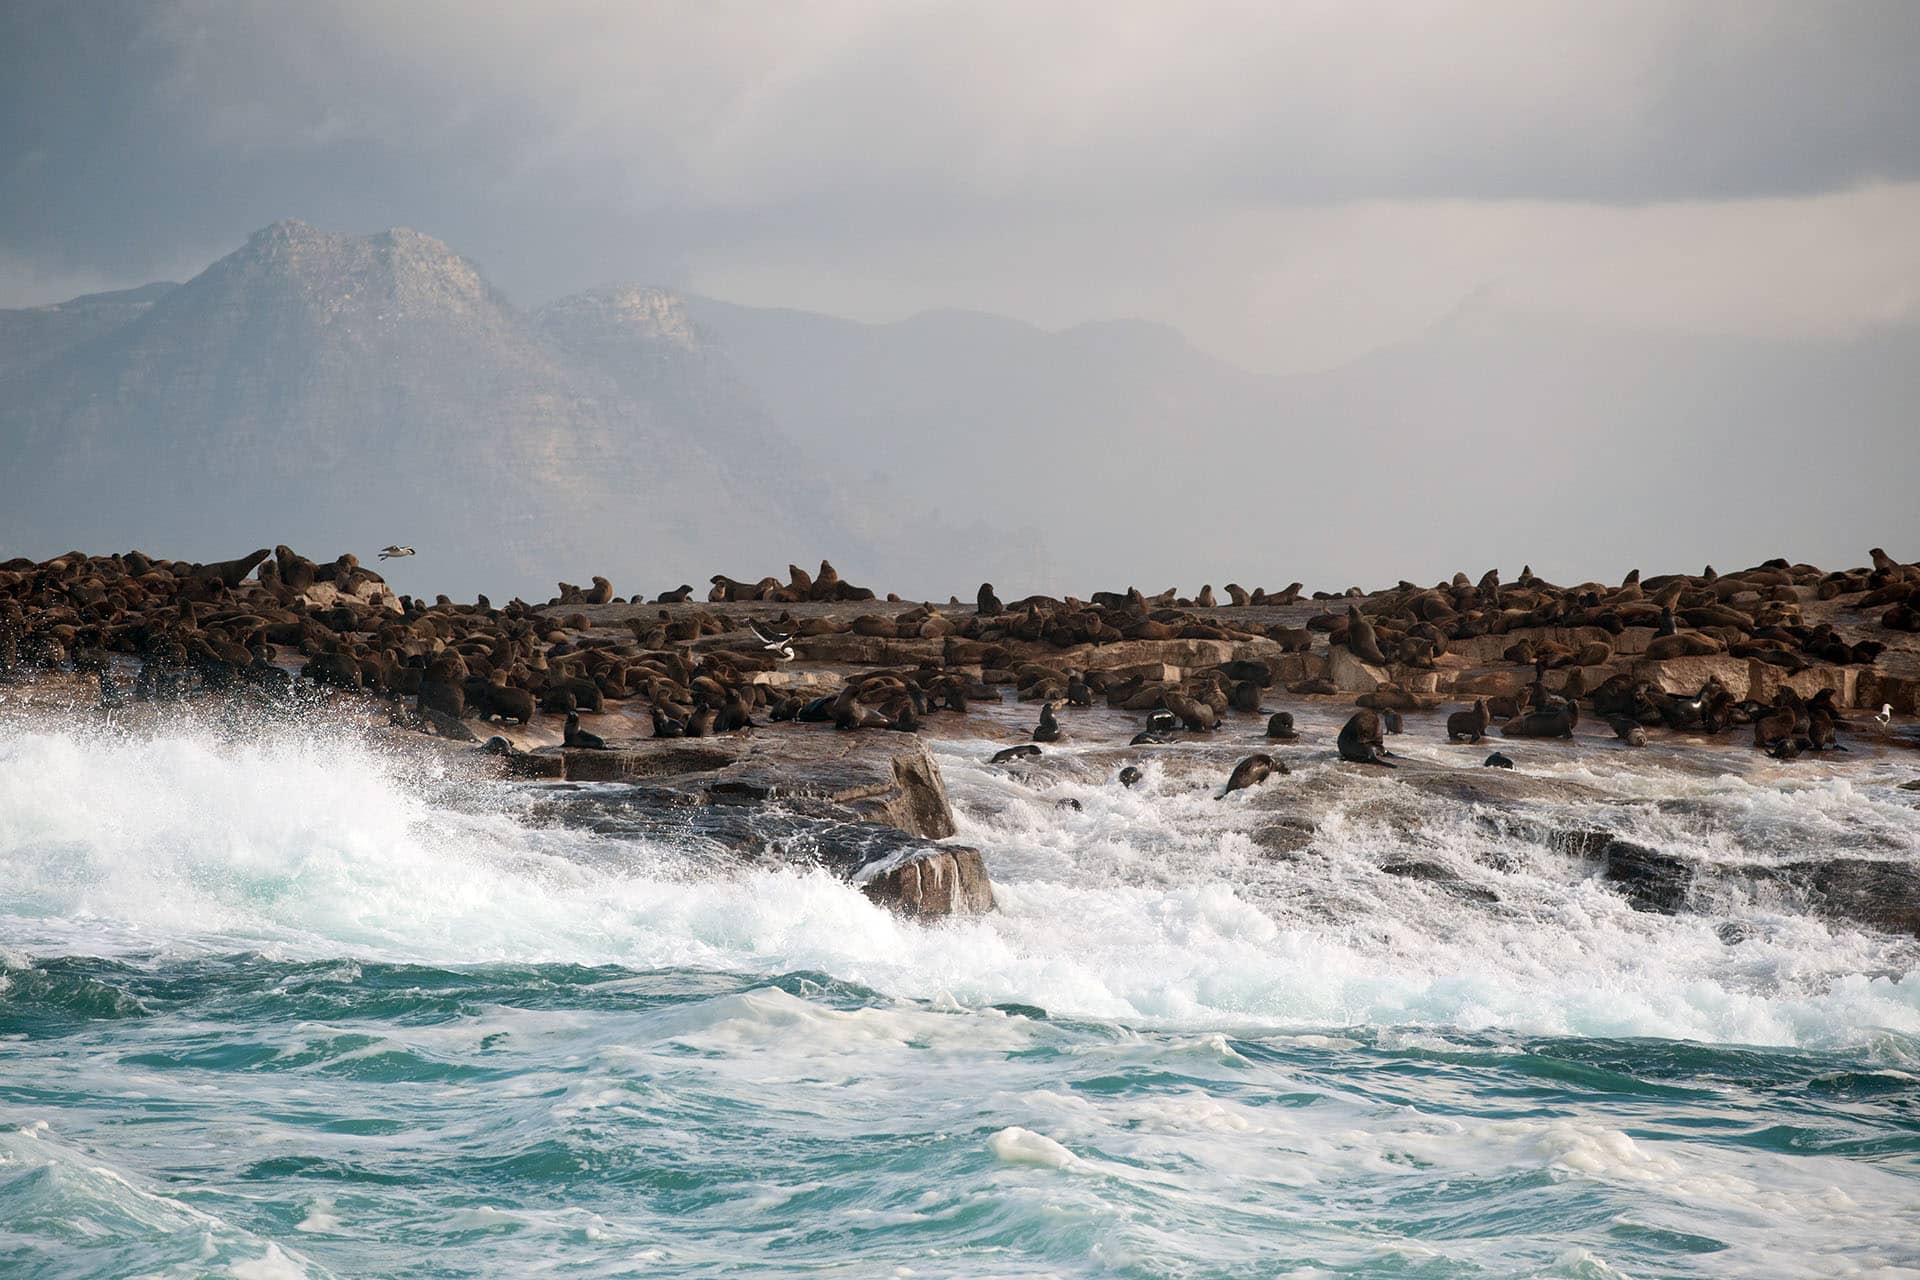 A colony of Cape fur seals in False Bay, South Africa - an animal that makes up the Marine Big Five in South Africa.